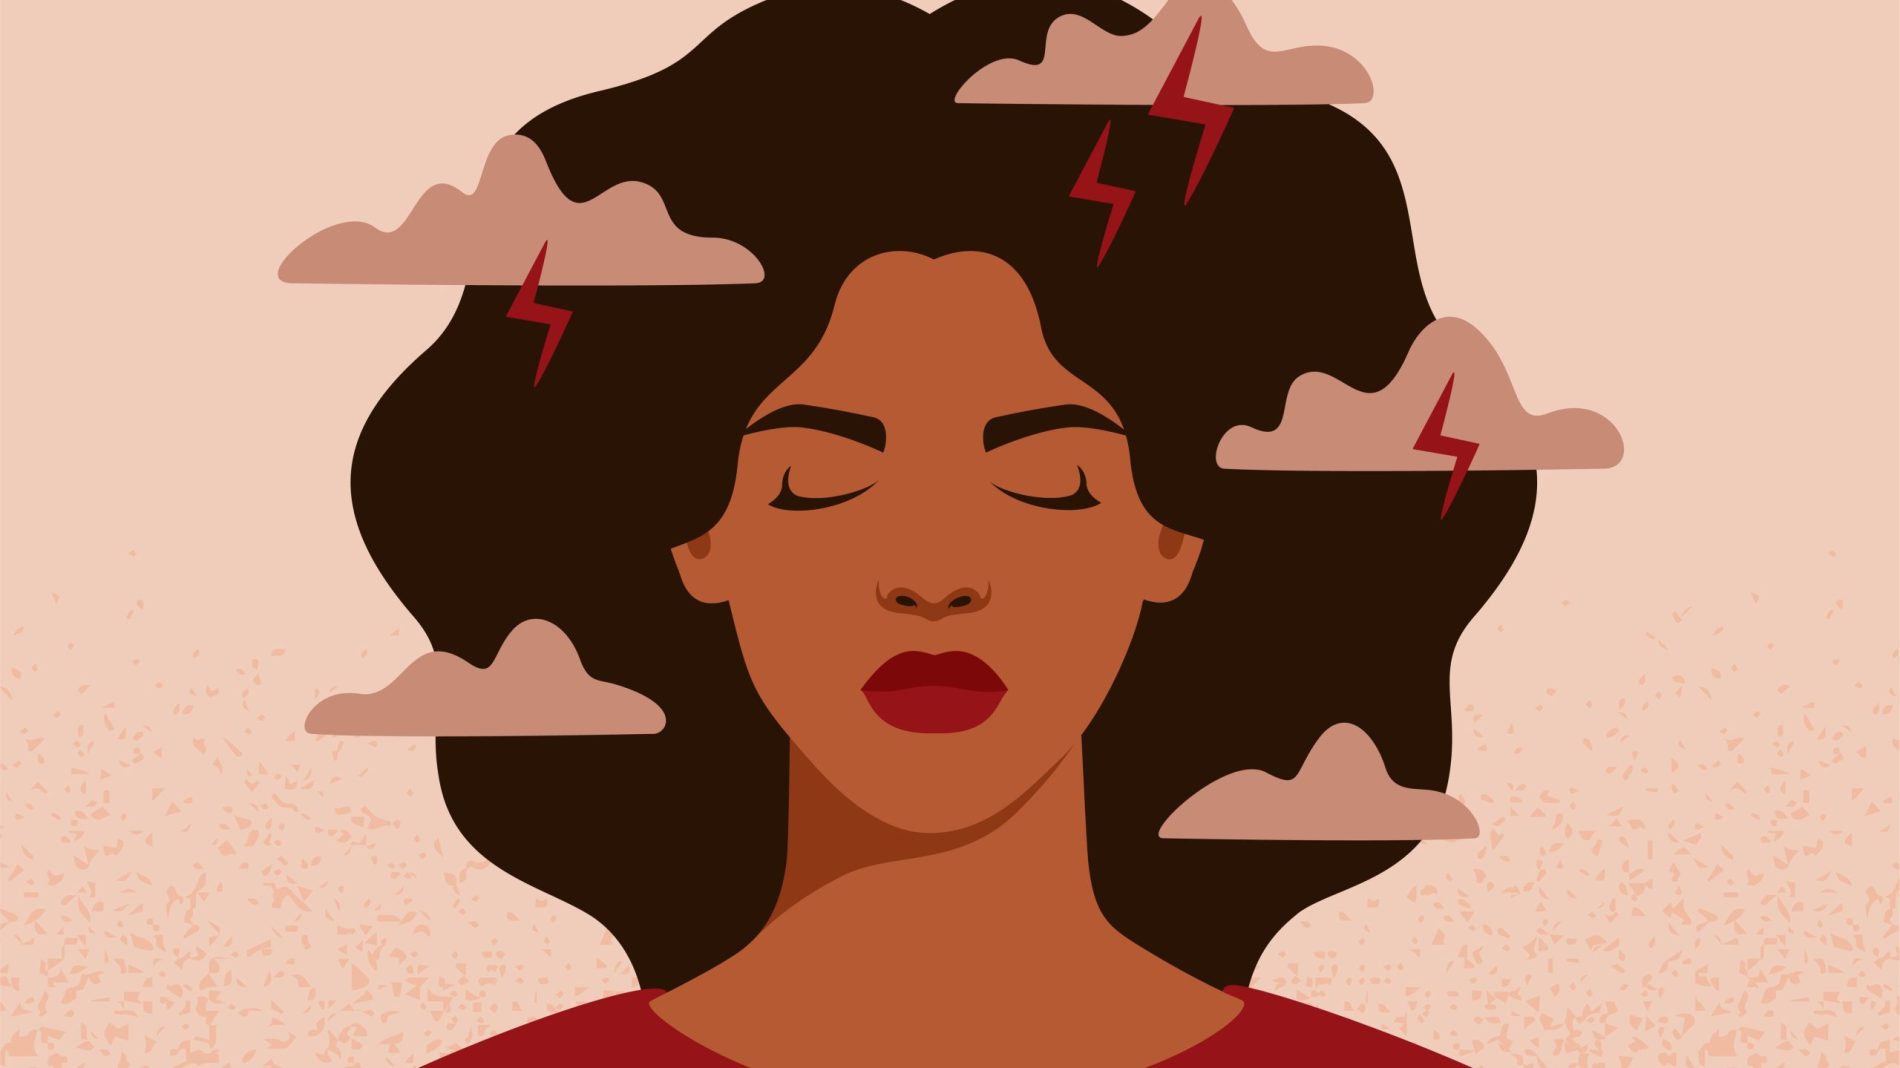 Illustration of a person with their eyes closed with thunder clouds around their head